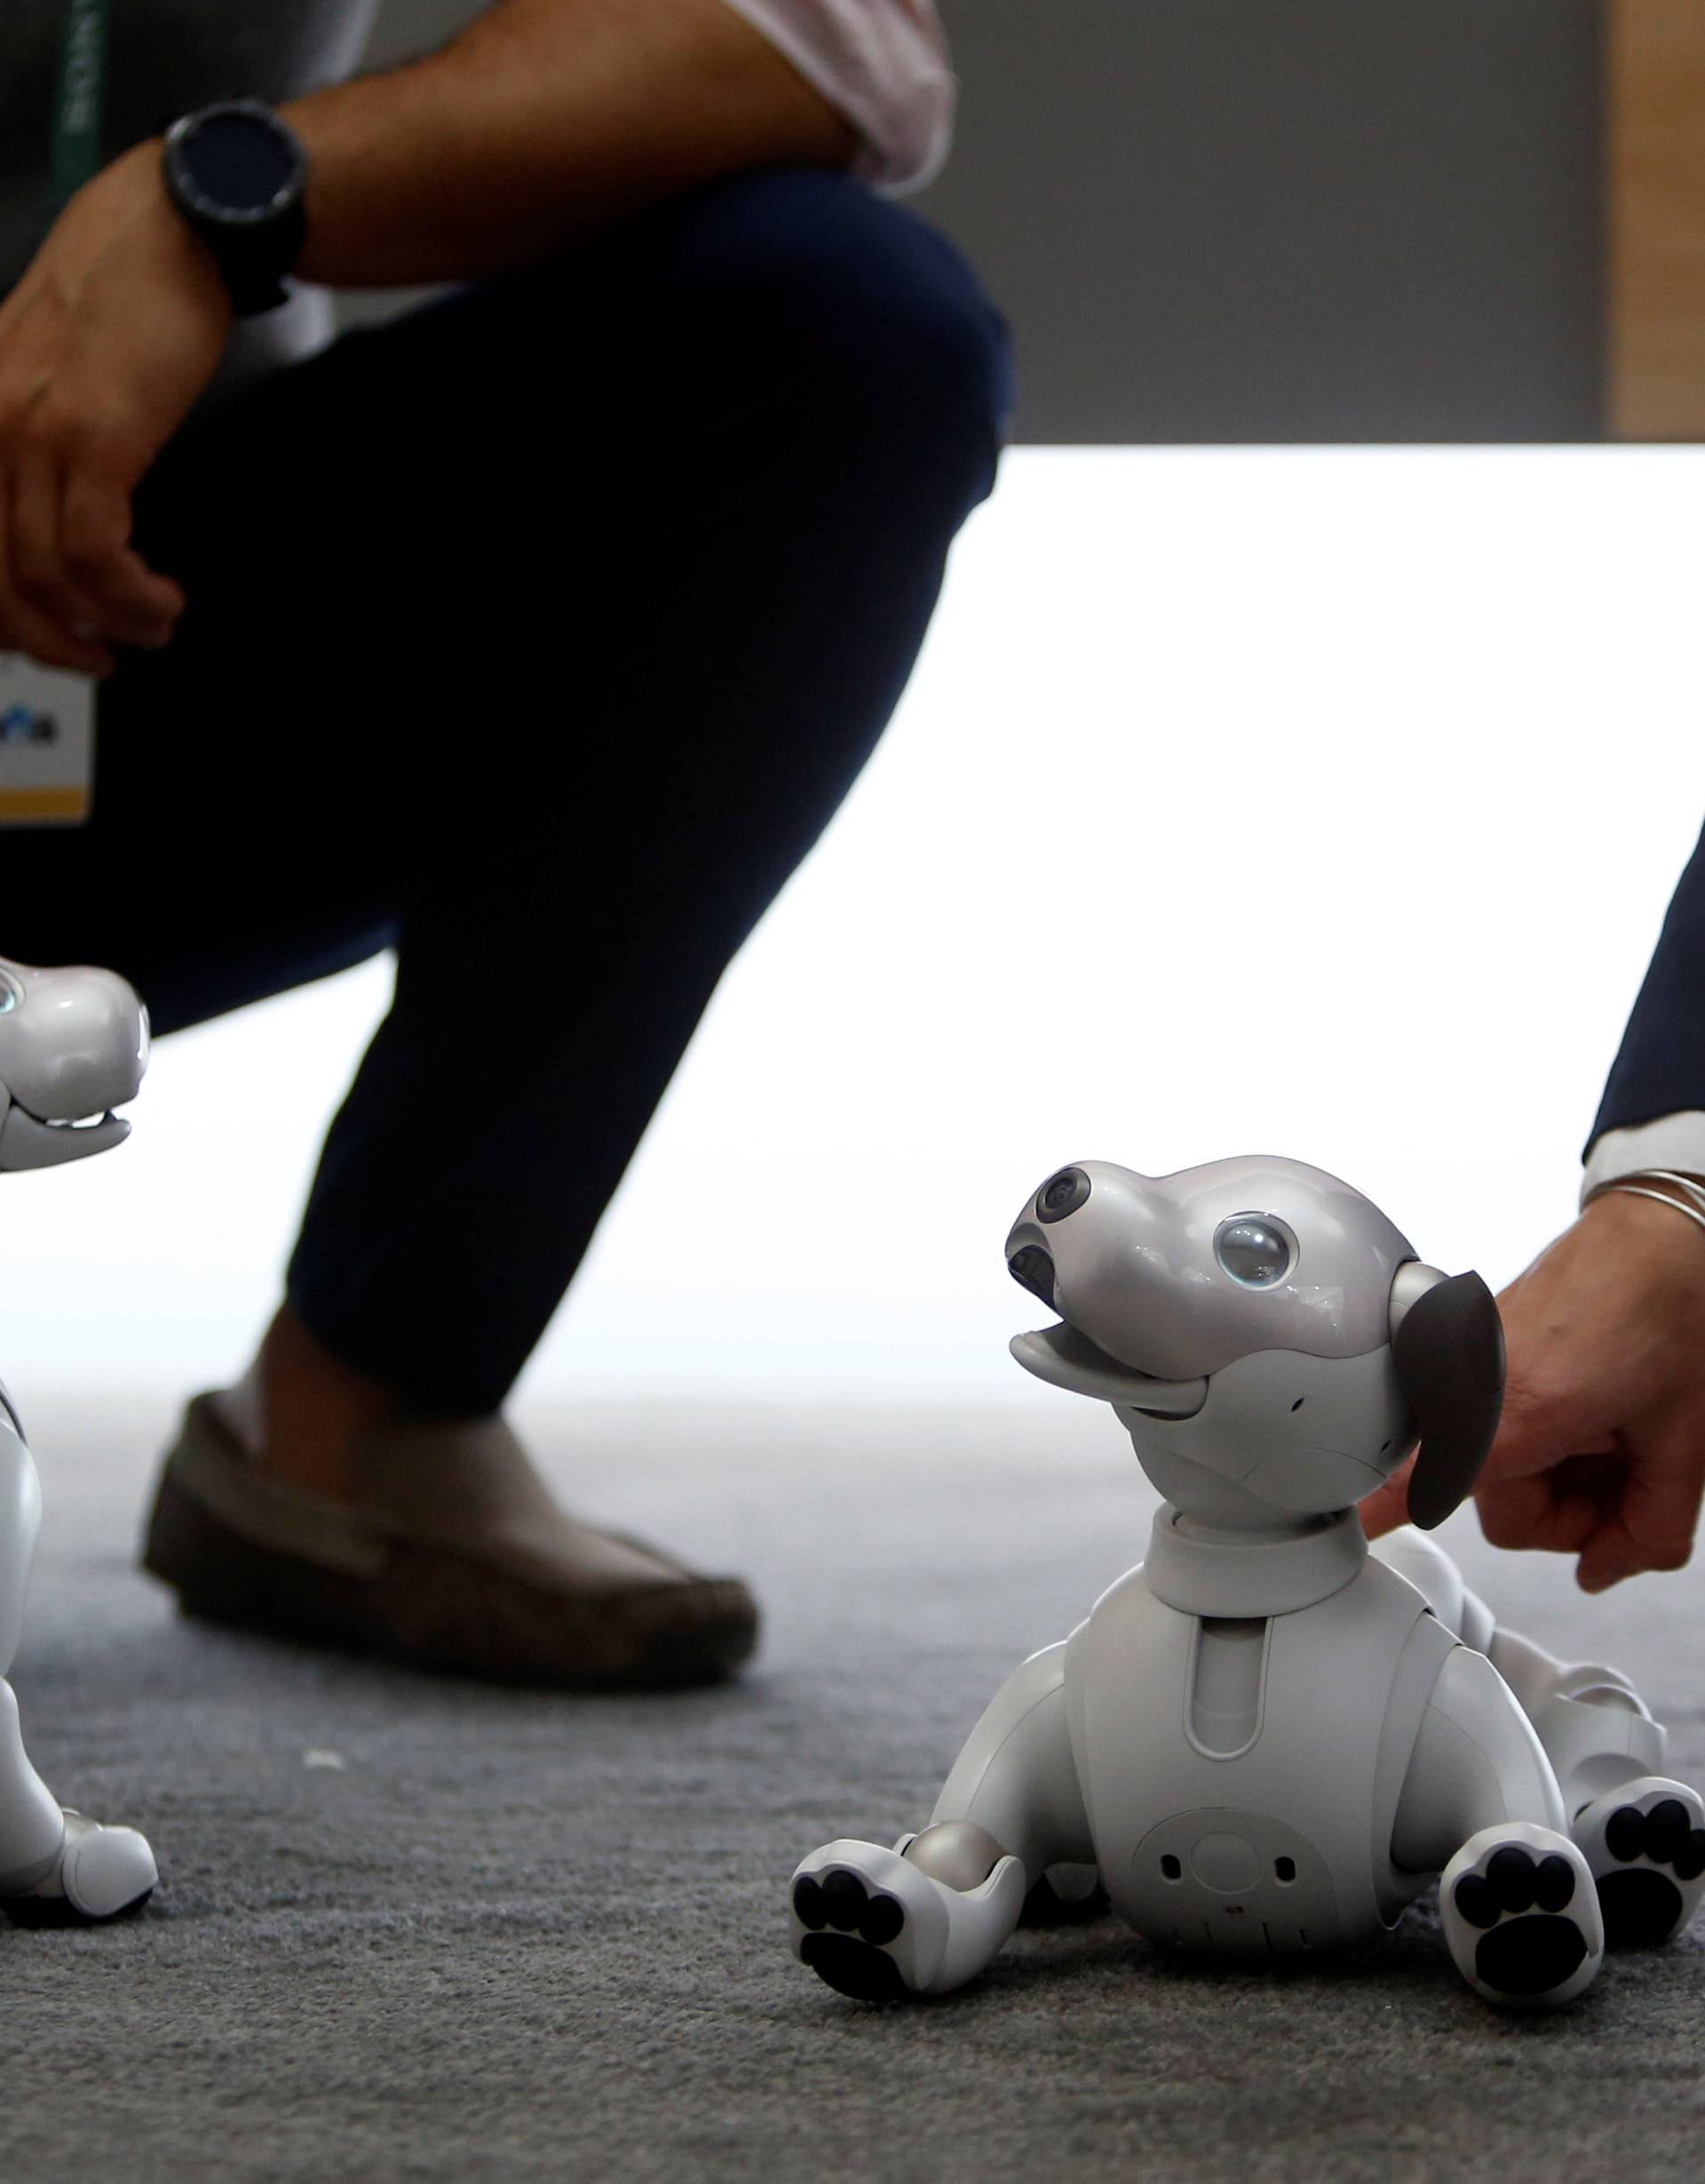 Sony's Aibo, robotic dogs, are displayed during the 2018 CES in Las Vegas